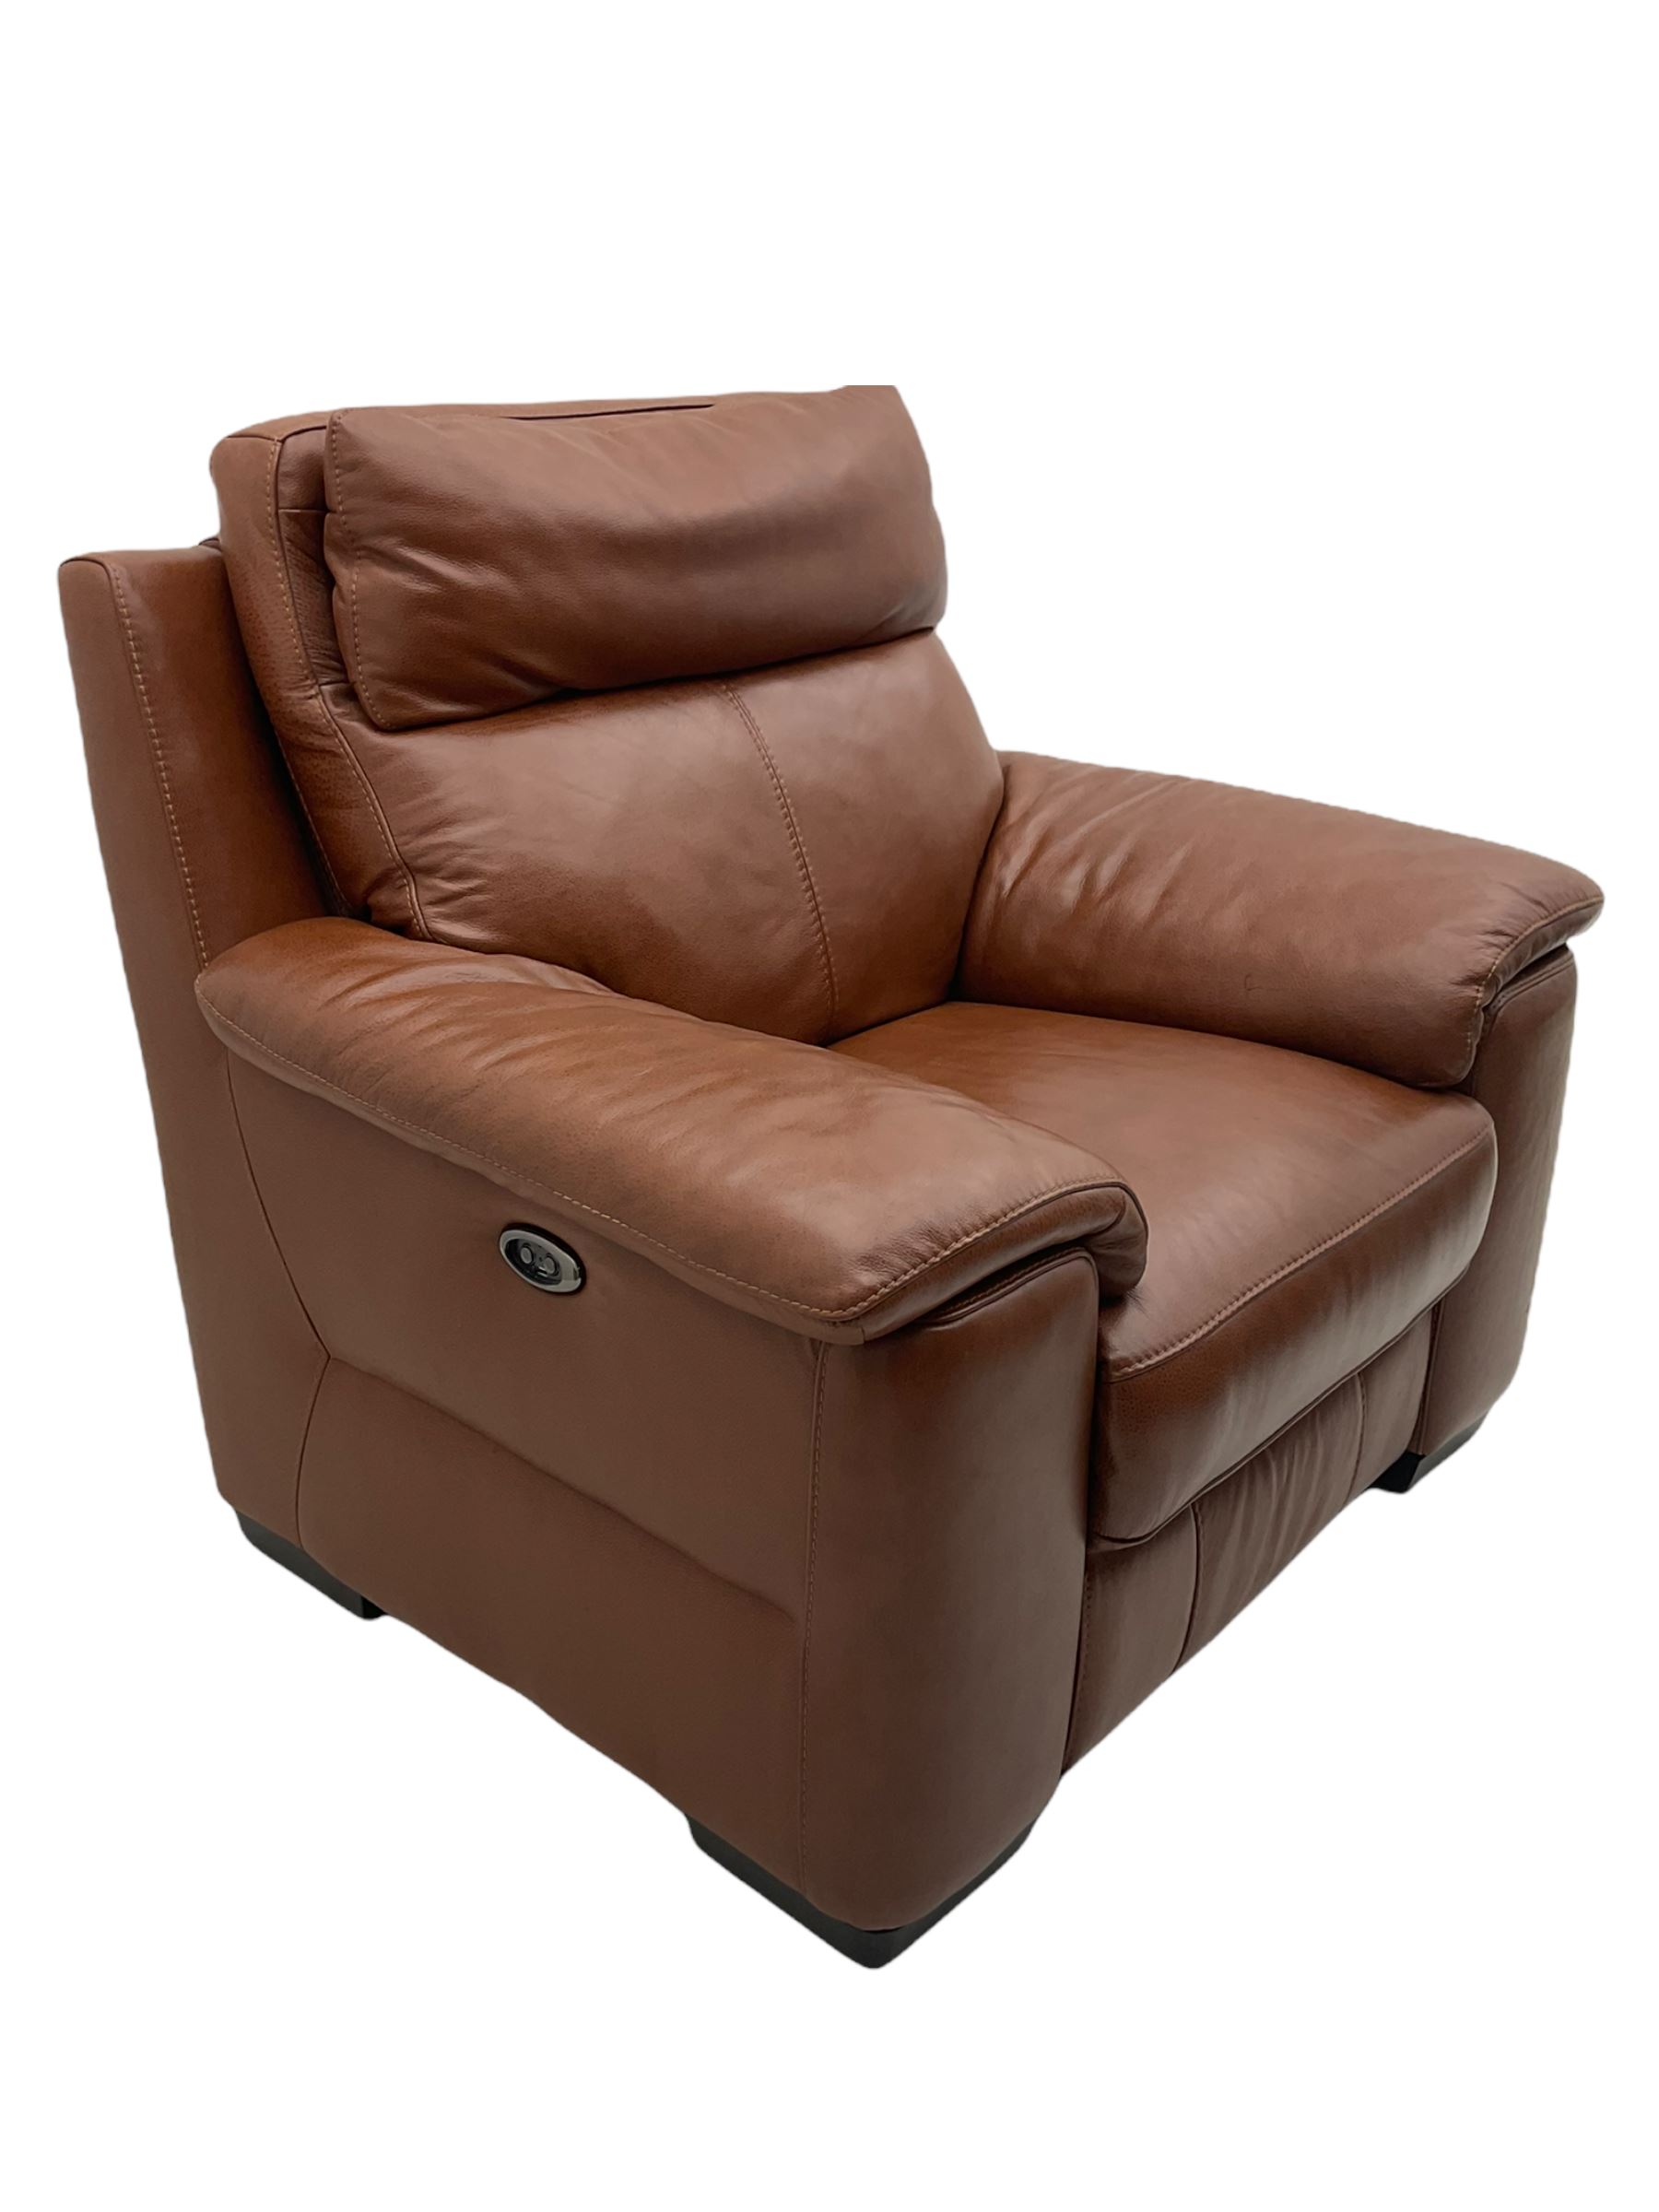 Three electric reclining sofa upholstered in tan leather - Image 14 of 23